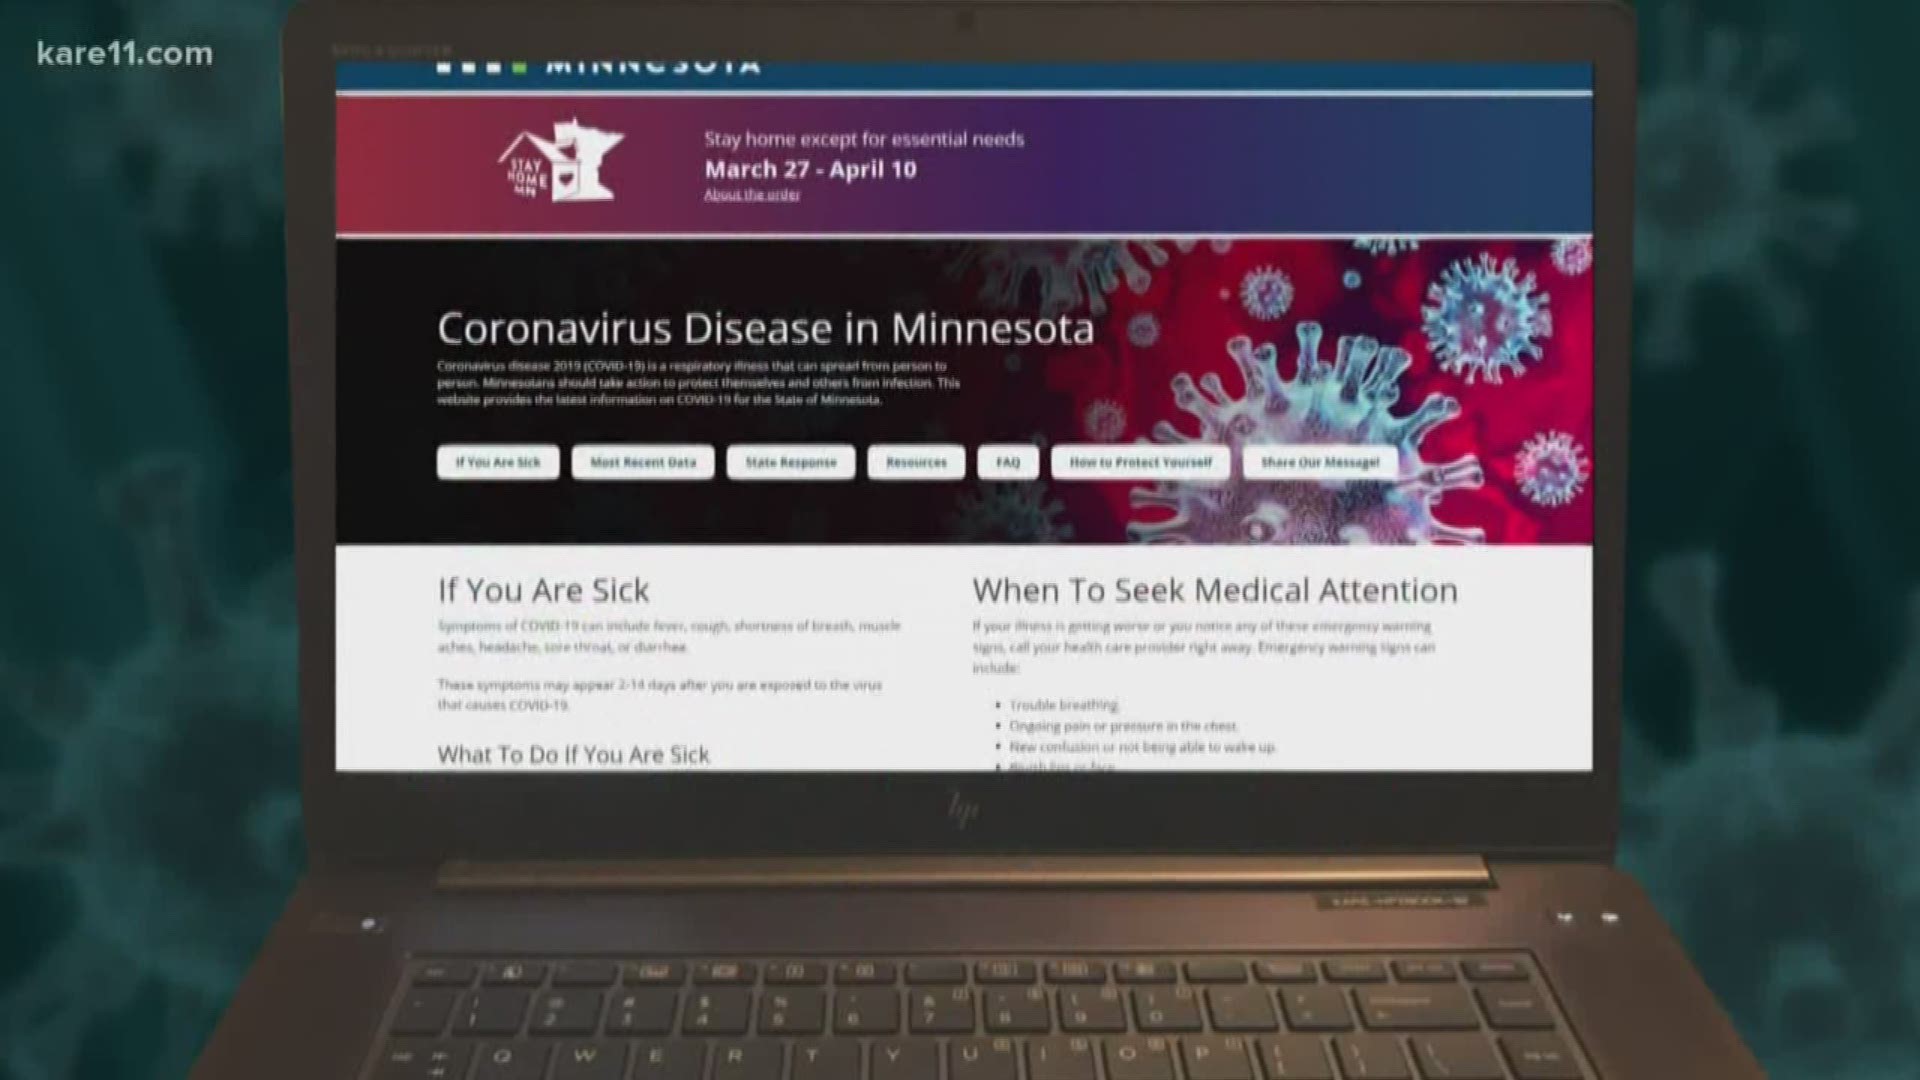 Want to see what data Gov. Walz weighs when deciding coronavirus responses? Or easy links to resources? It's in the Minnesota's new COVID web portal mn.gov/covid19